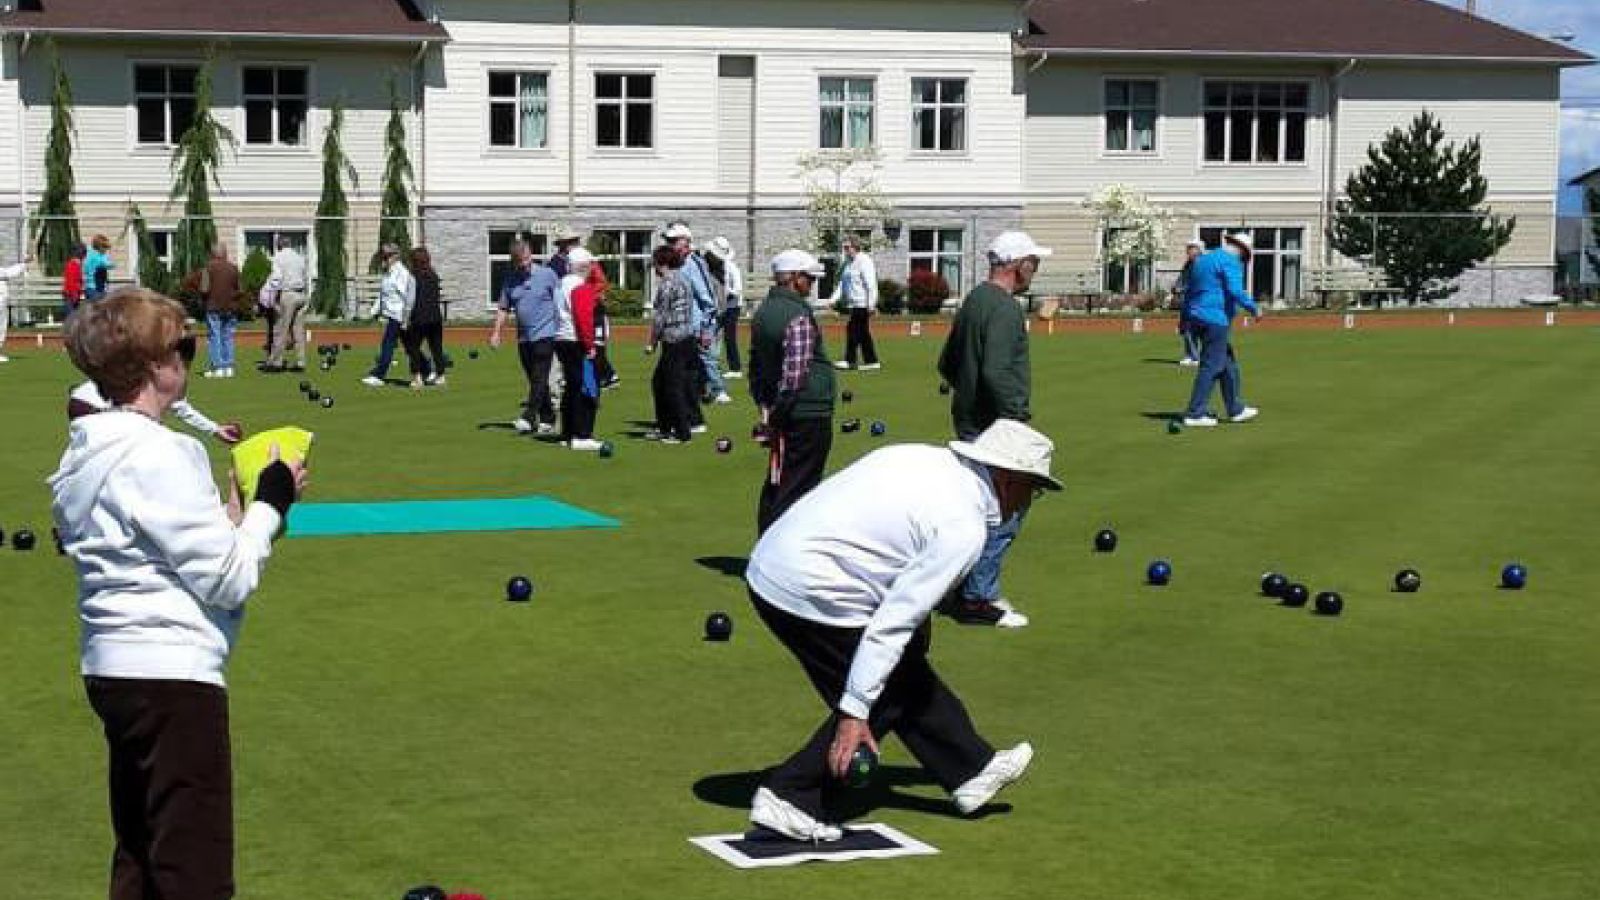 Parksville Lawn Bowling Club members lawn bowling with building and blue skies in the background